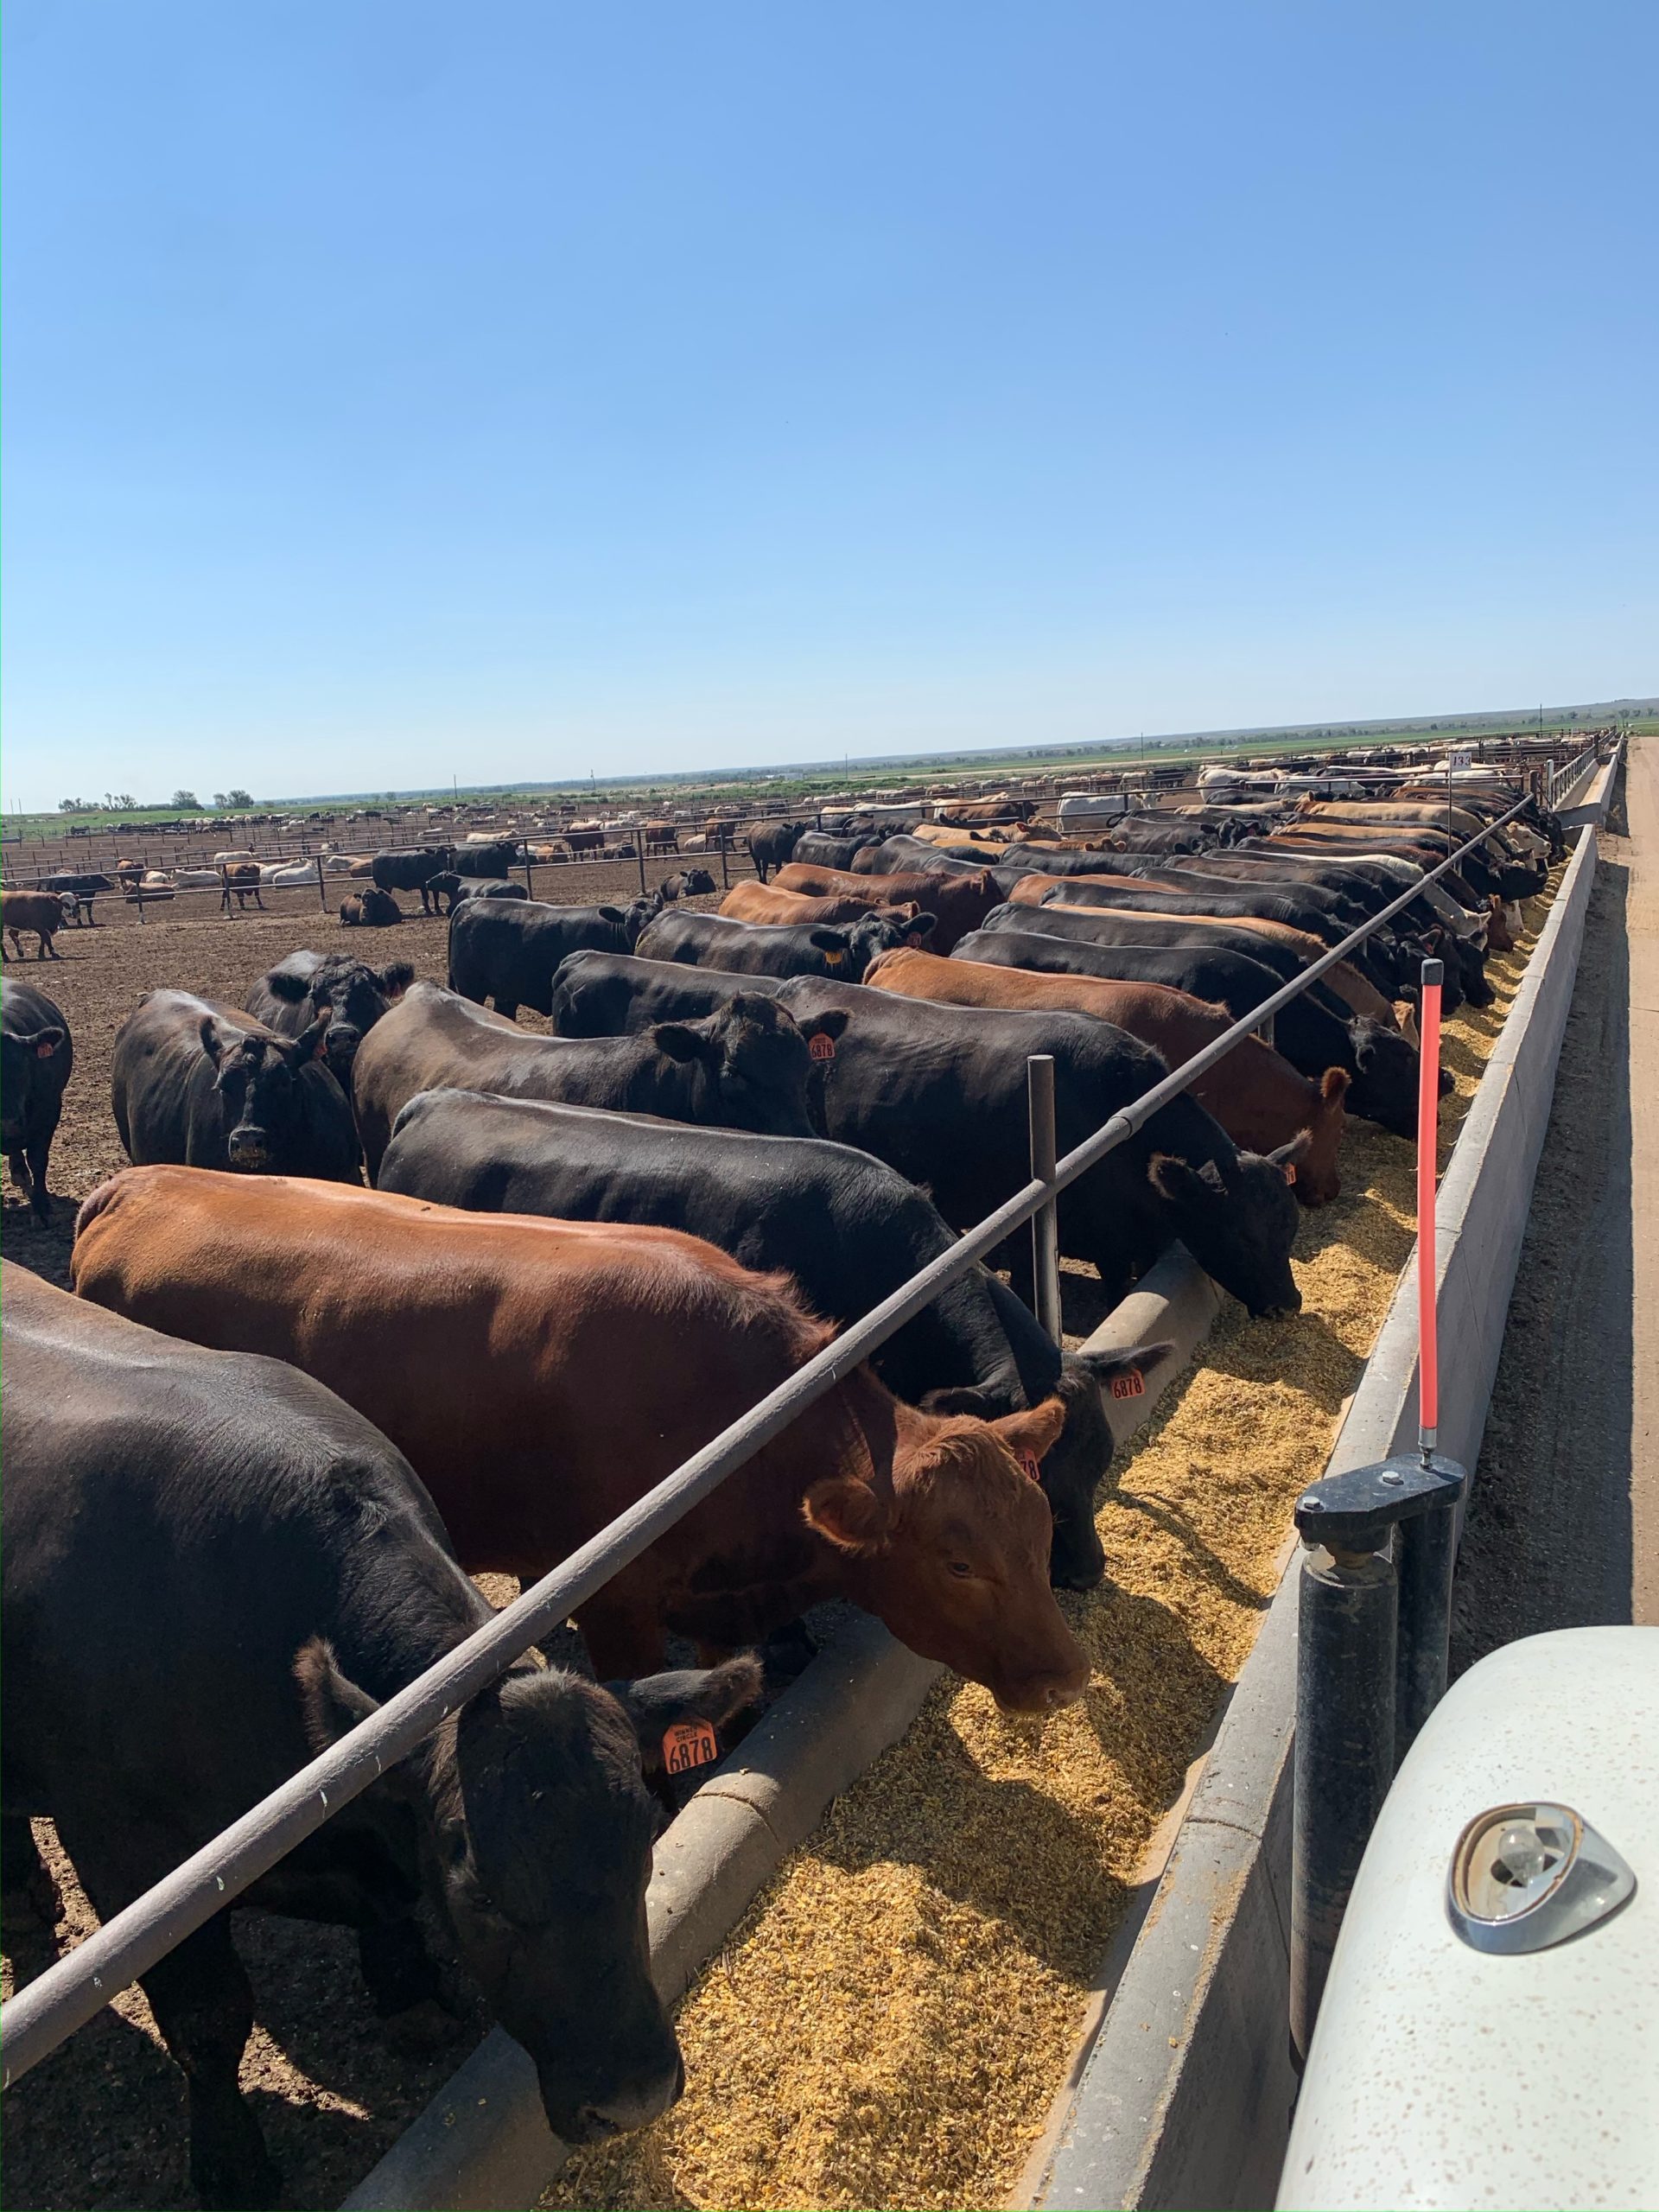 Cattle eating at a feed bunk in a feed lot where they will spend about 120 days of their life.